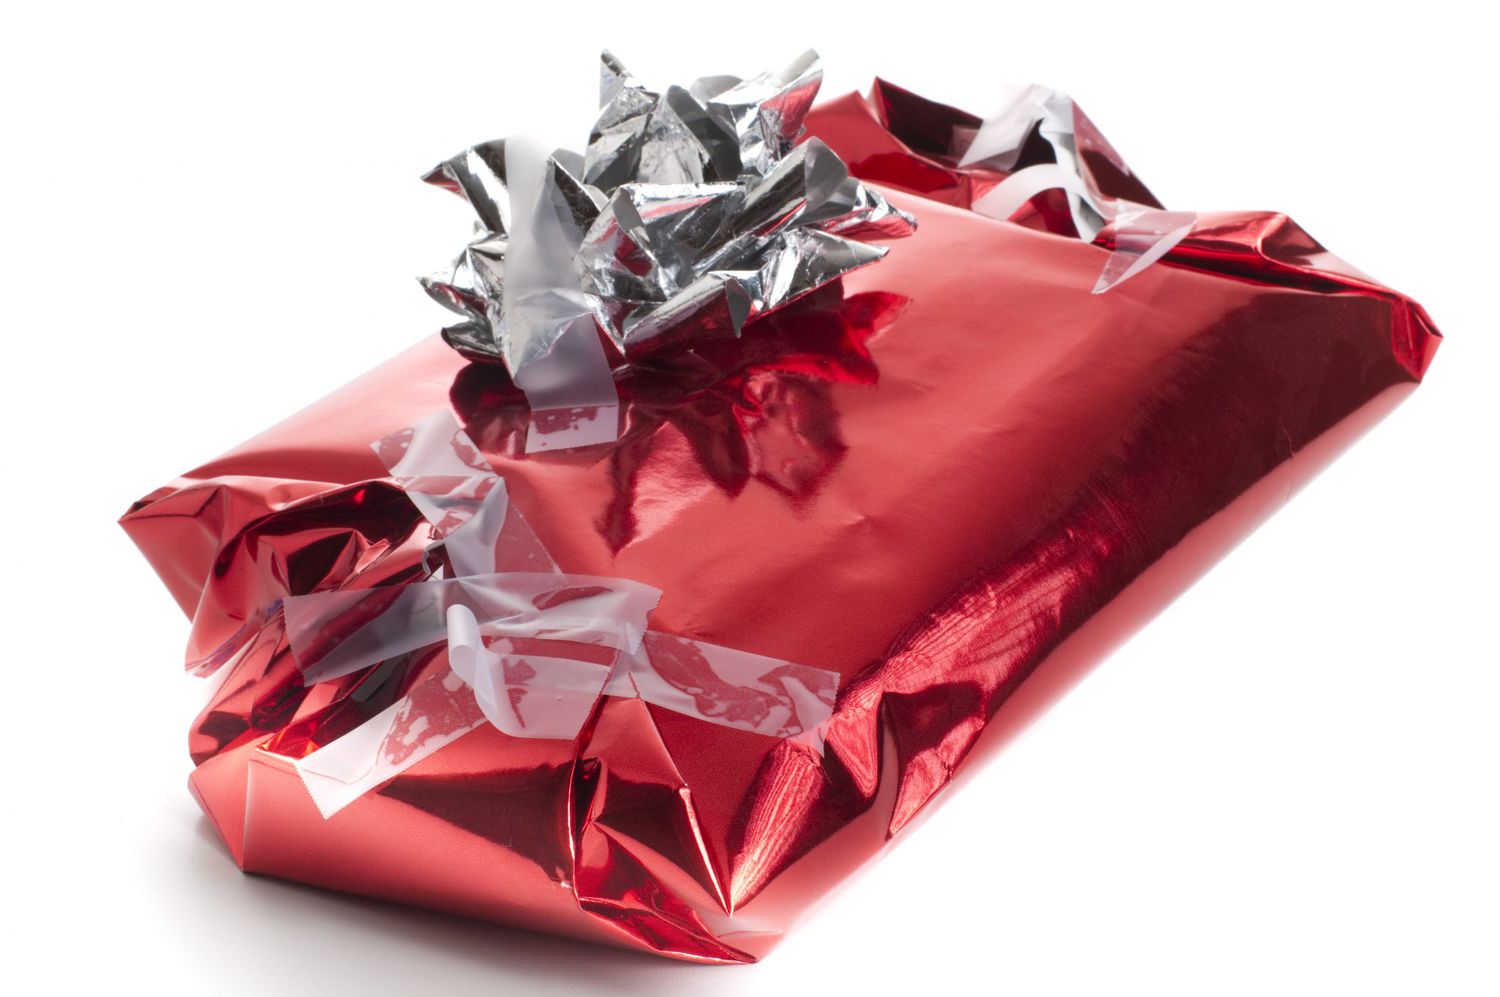 Badly wrapped gift